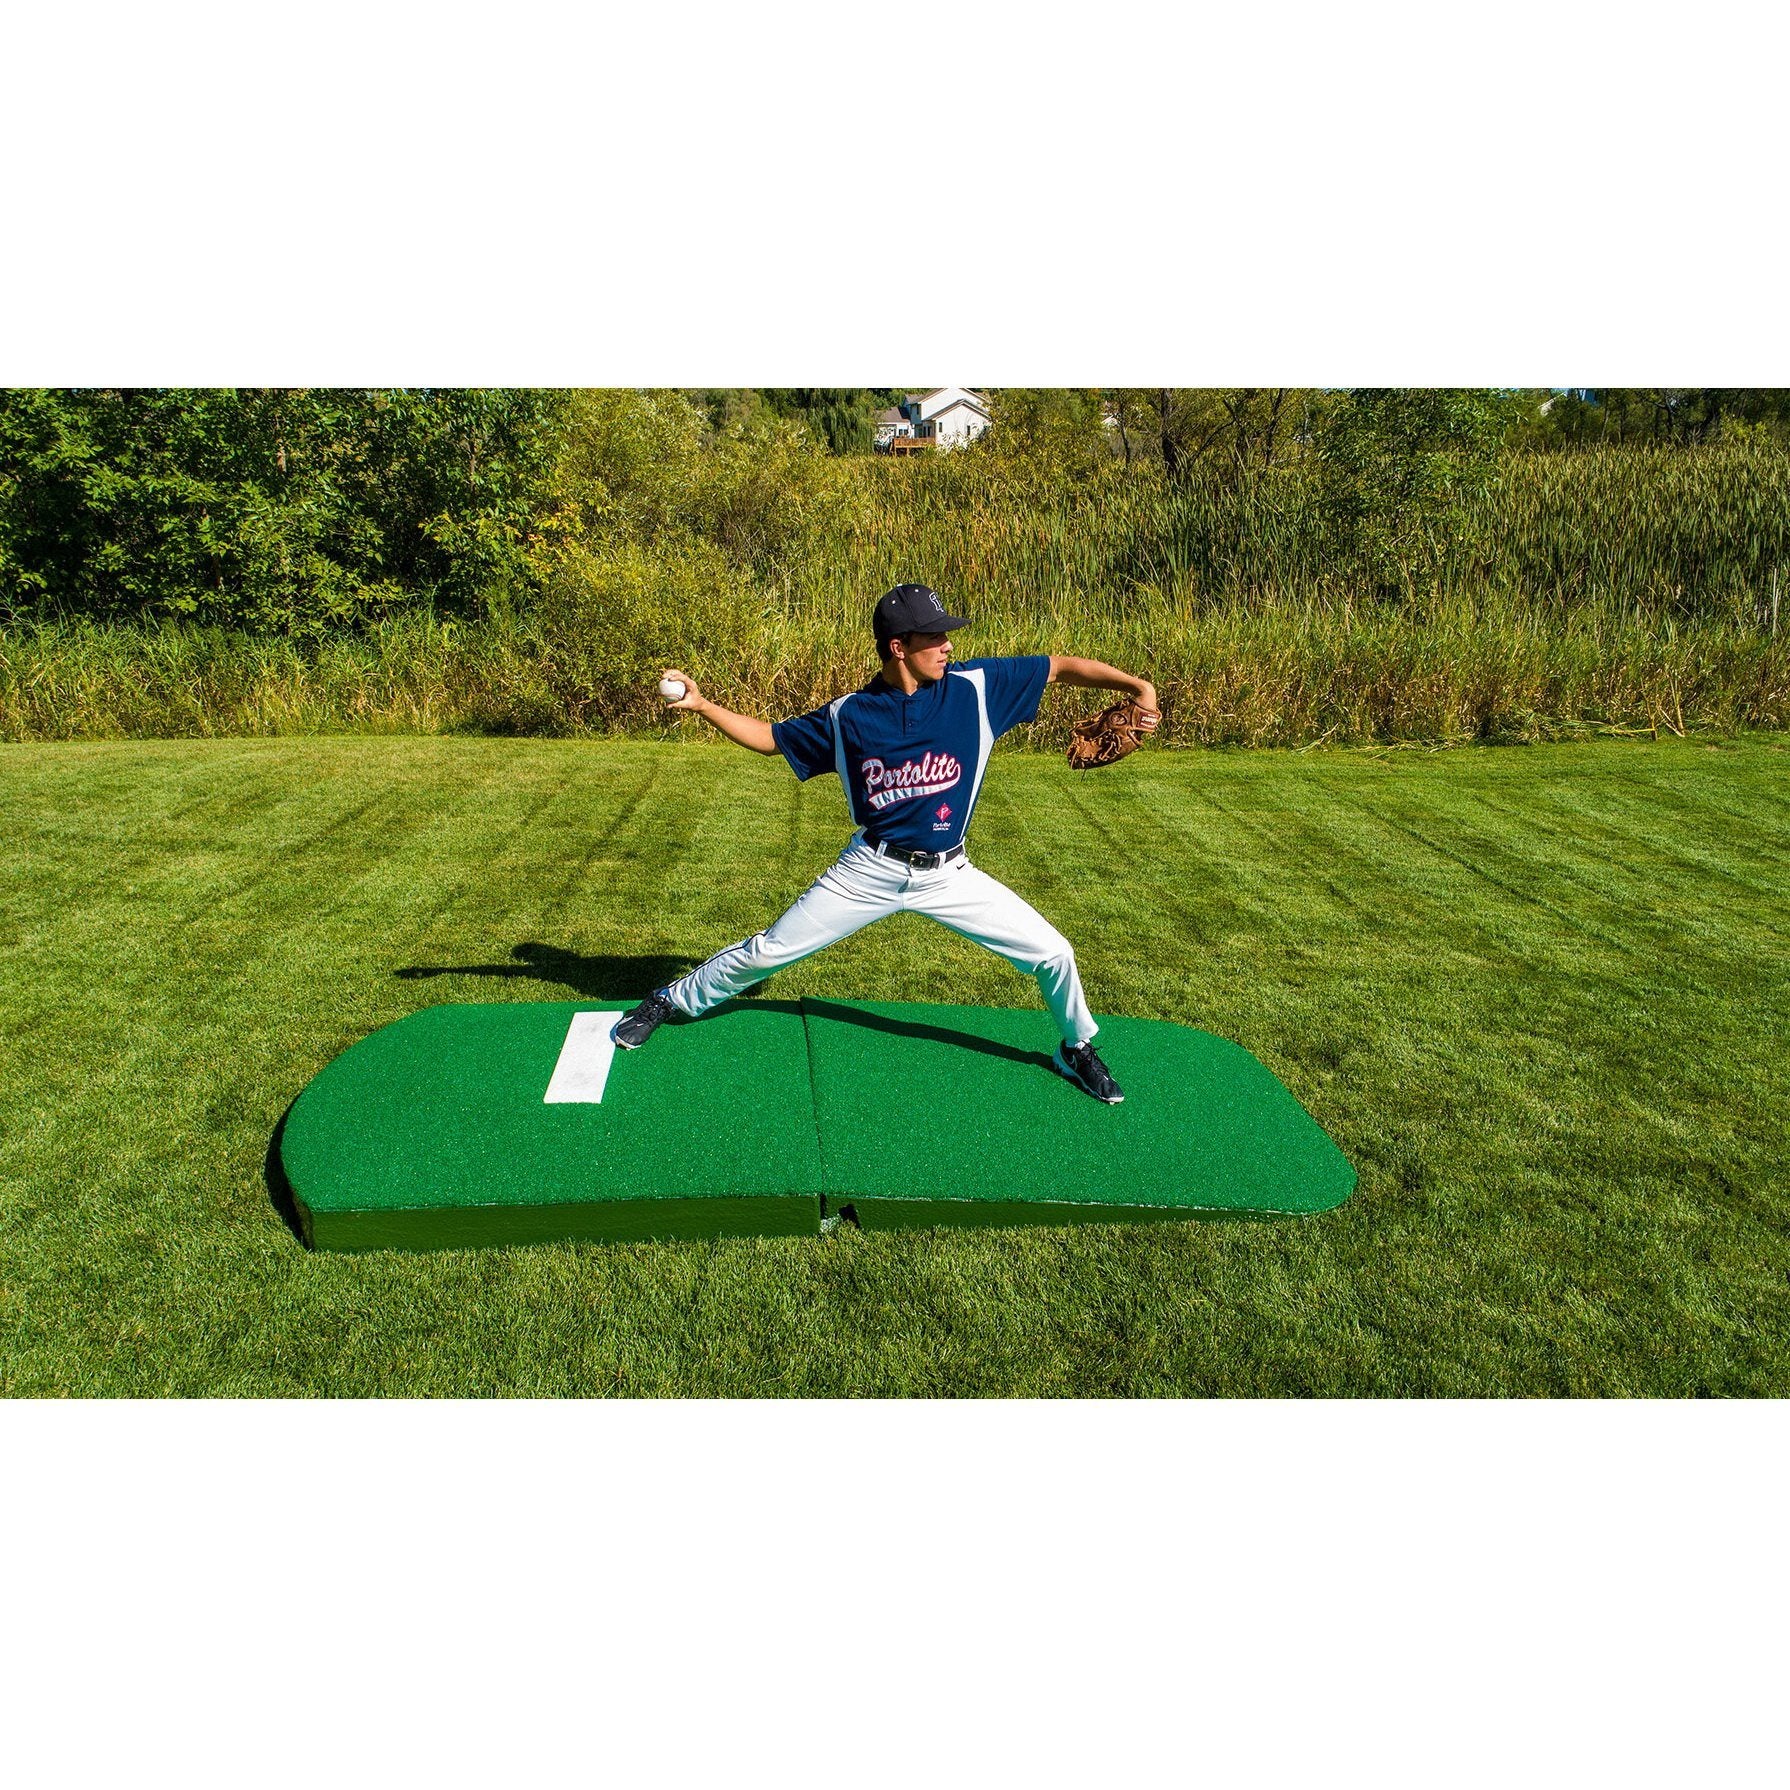 Portolite 10" Two-Piece Portable Pitching Mound green top angle view pitcher